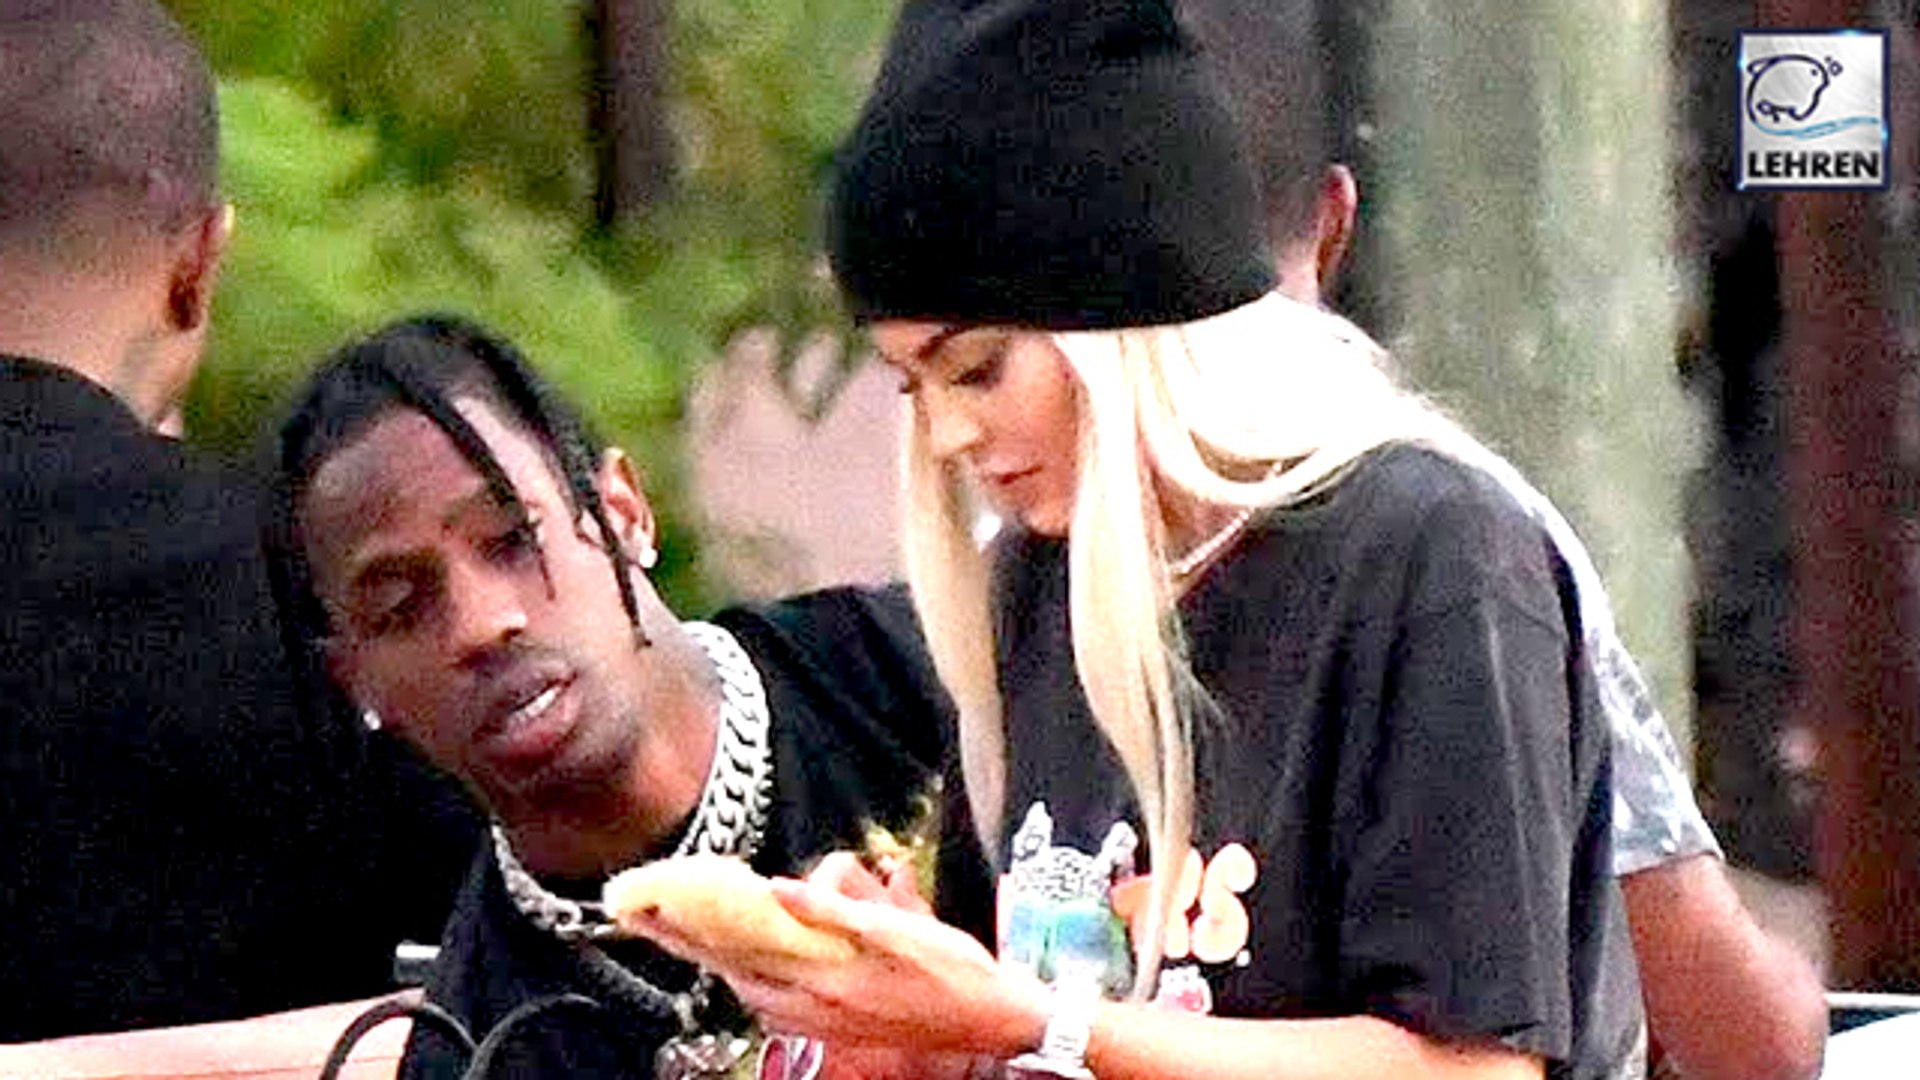 Kylie Jenner & Travis Scott Attend Coachella 2 Years After They Had Their 1st Date There